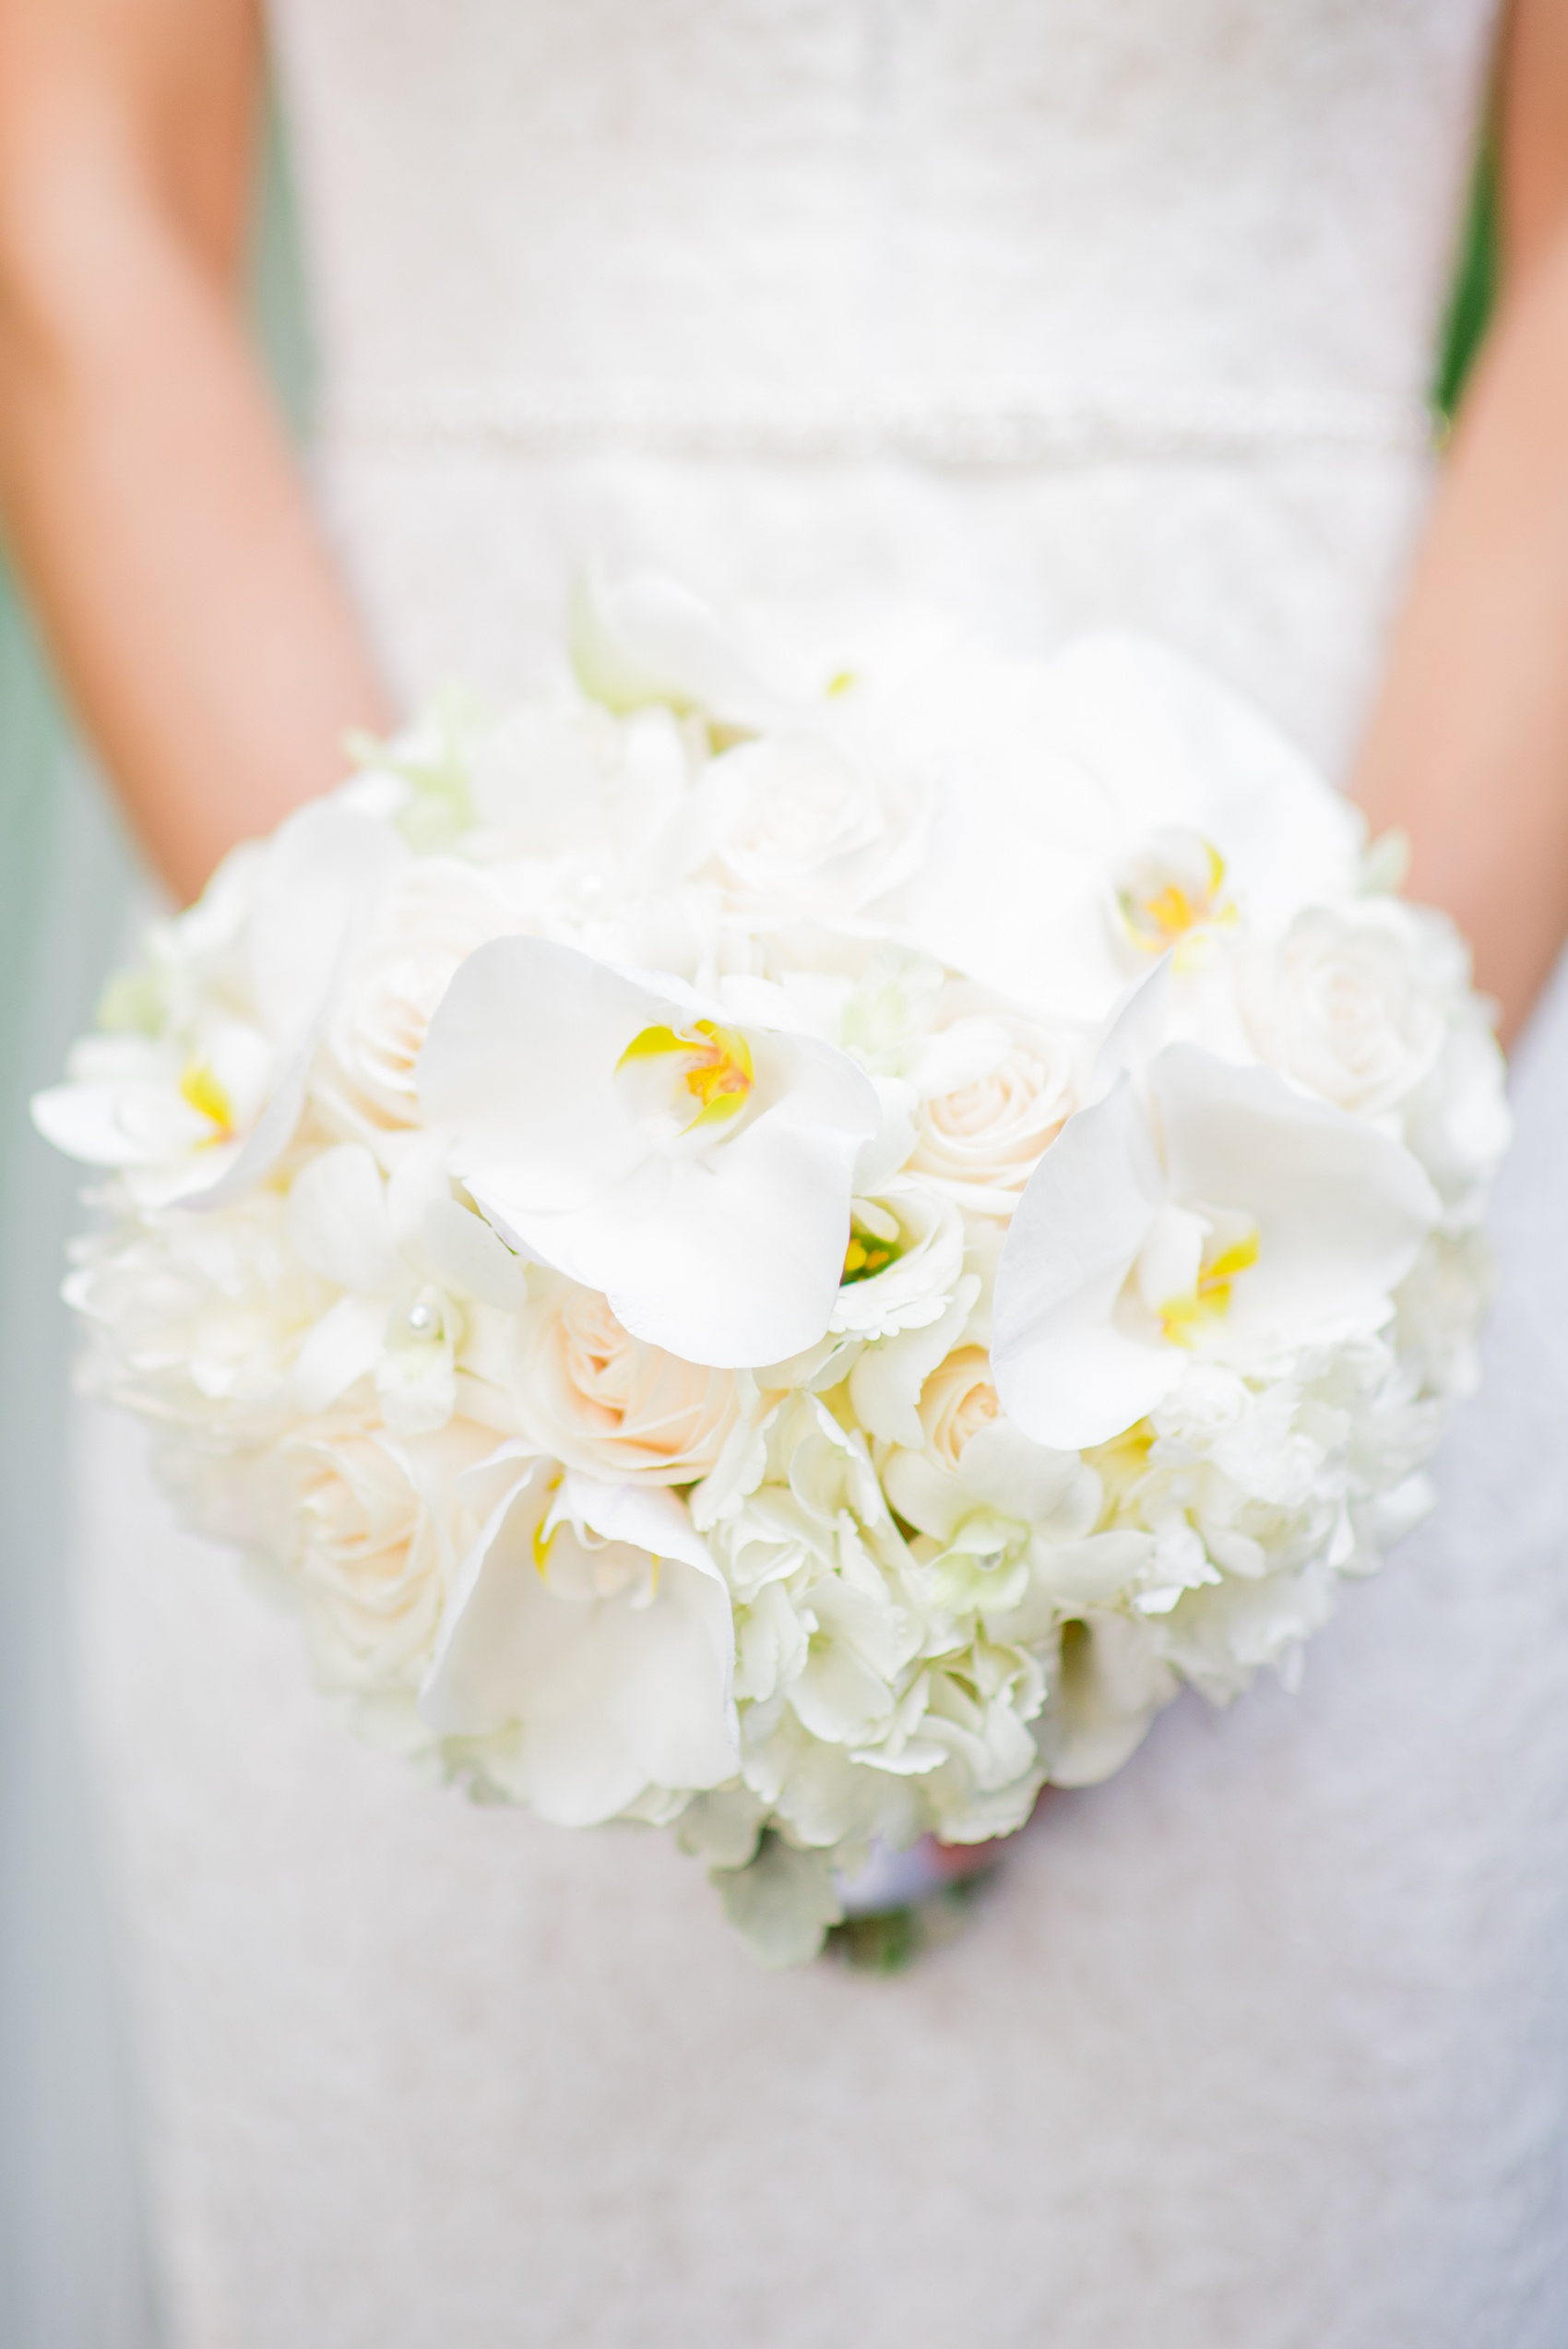 Mikkel Paige Photography pictures of a Westbury Manor wedding on Long Island. Detail photo of the bride's white orchid, hydrangea and rose bouquet.